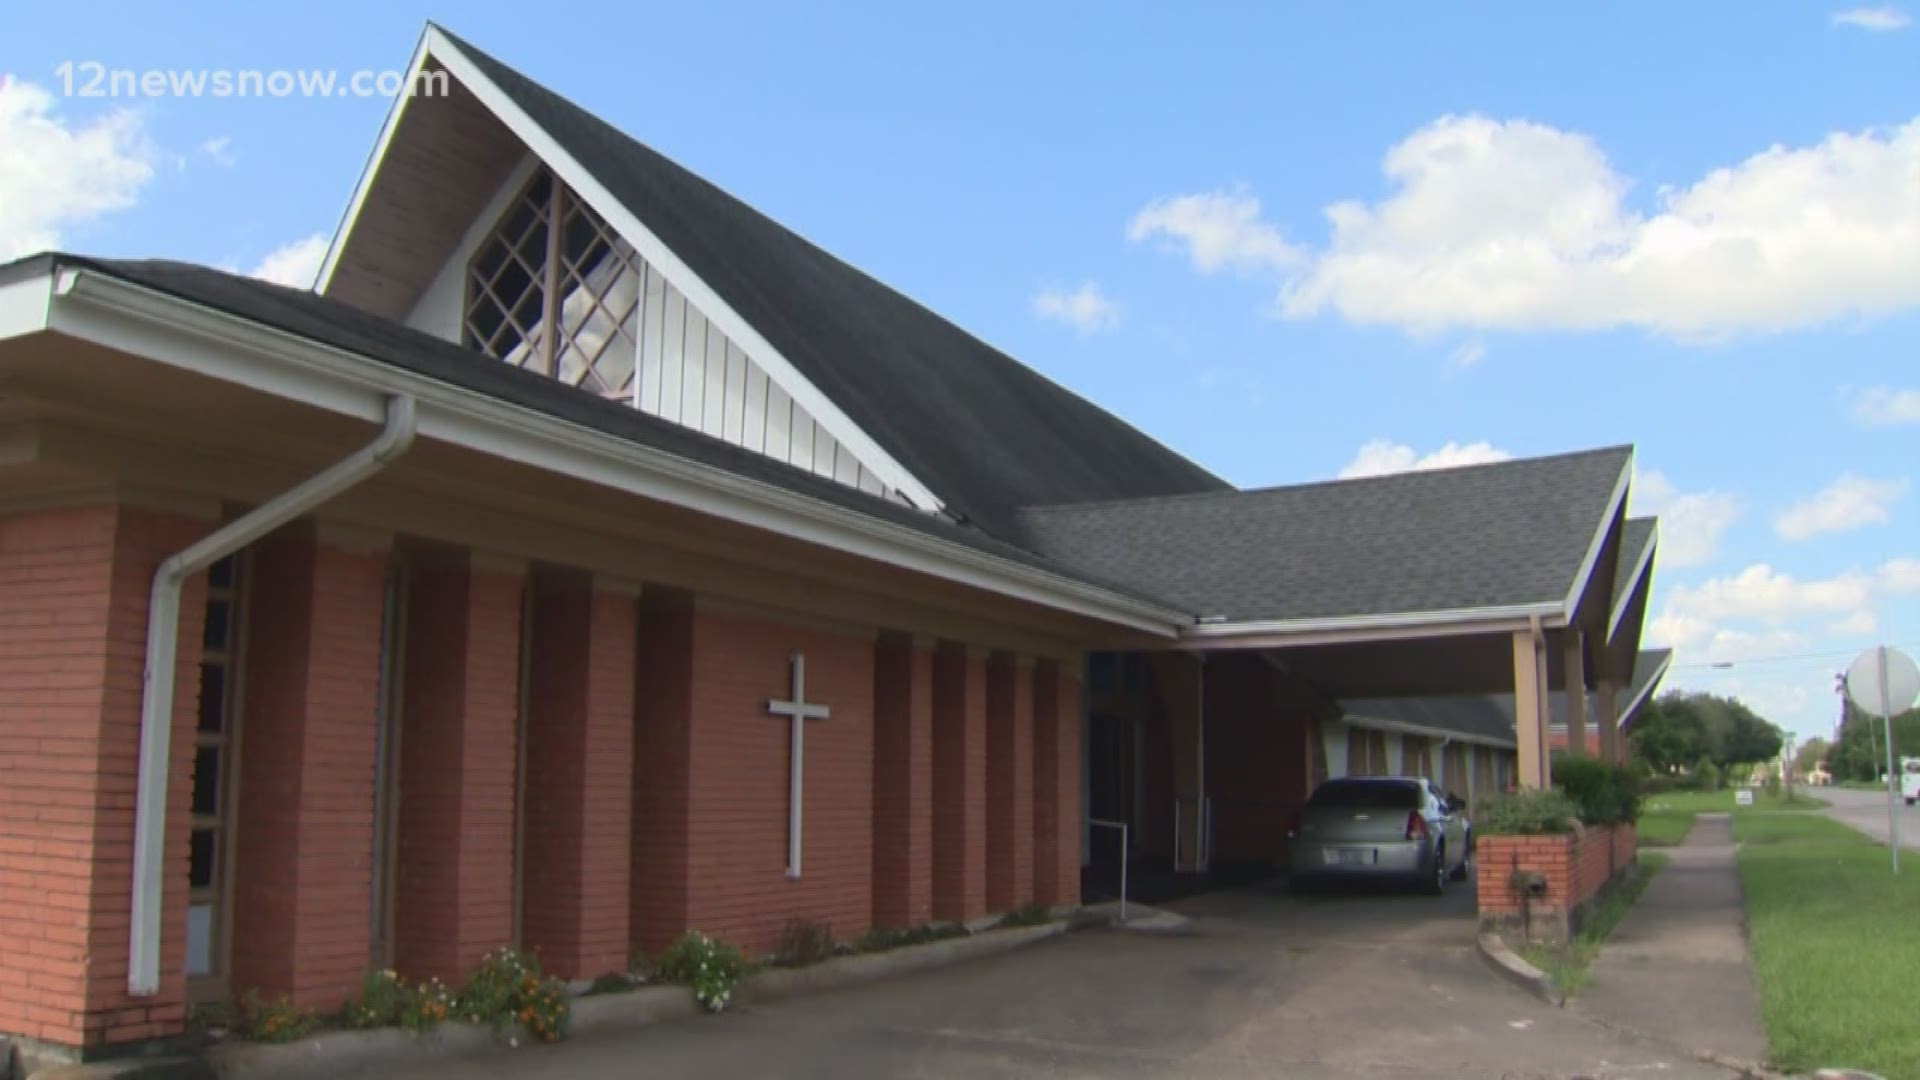 St. James United Methodist Church in Beaumont is asking for items to donate to flood victims.